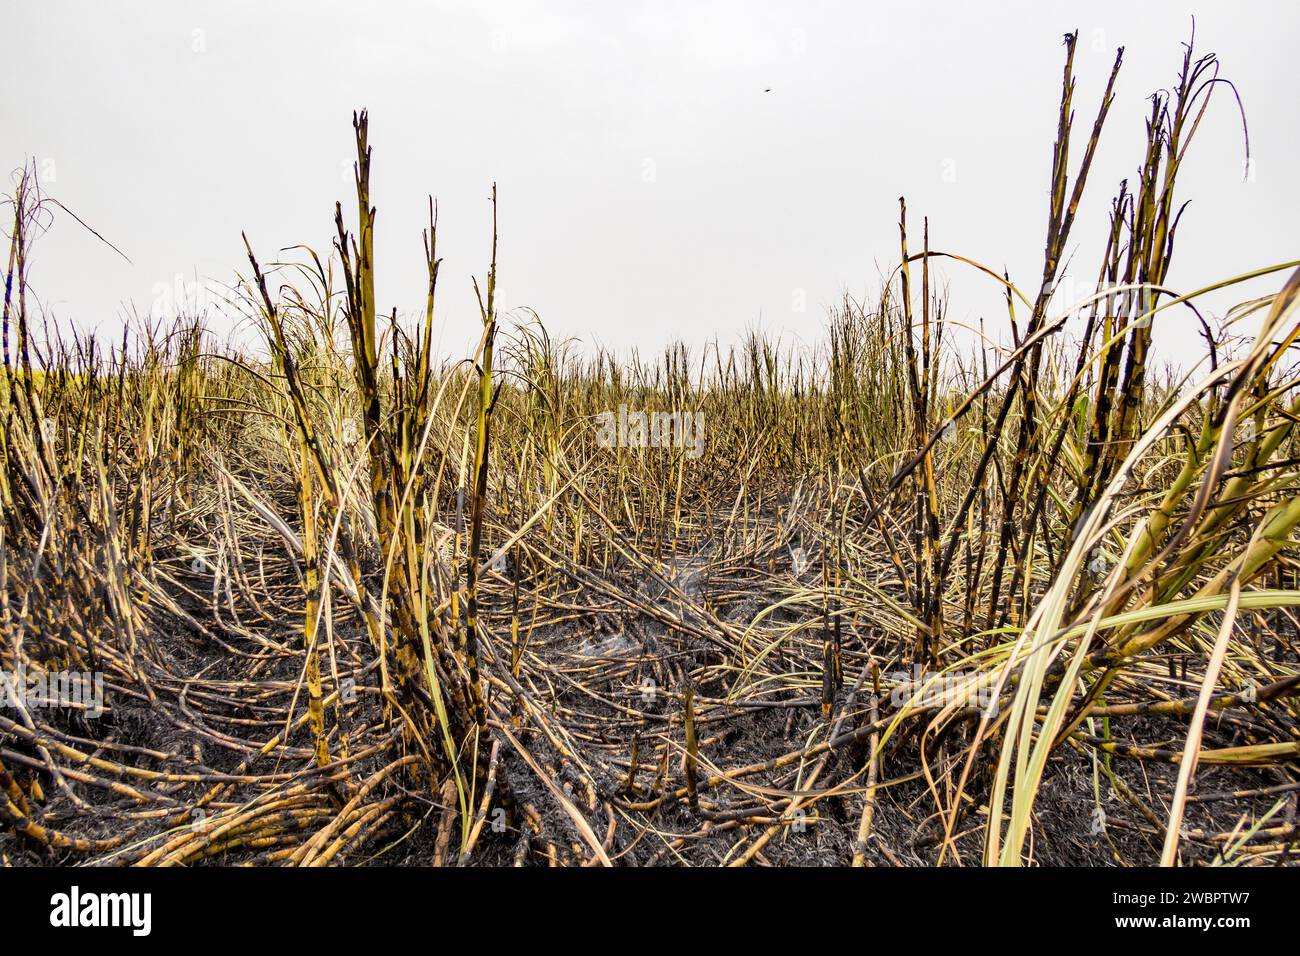 West Africa, Senegal, Richard Toll sugar plantation. Here the cane has been burnt to drive out animals harmful to the men harvesting sugar cane. Stock Photo